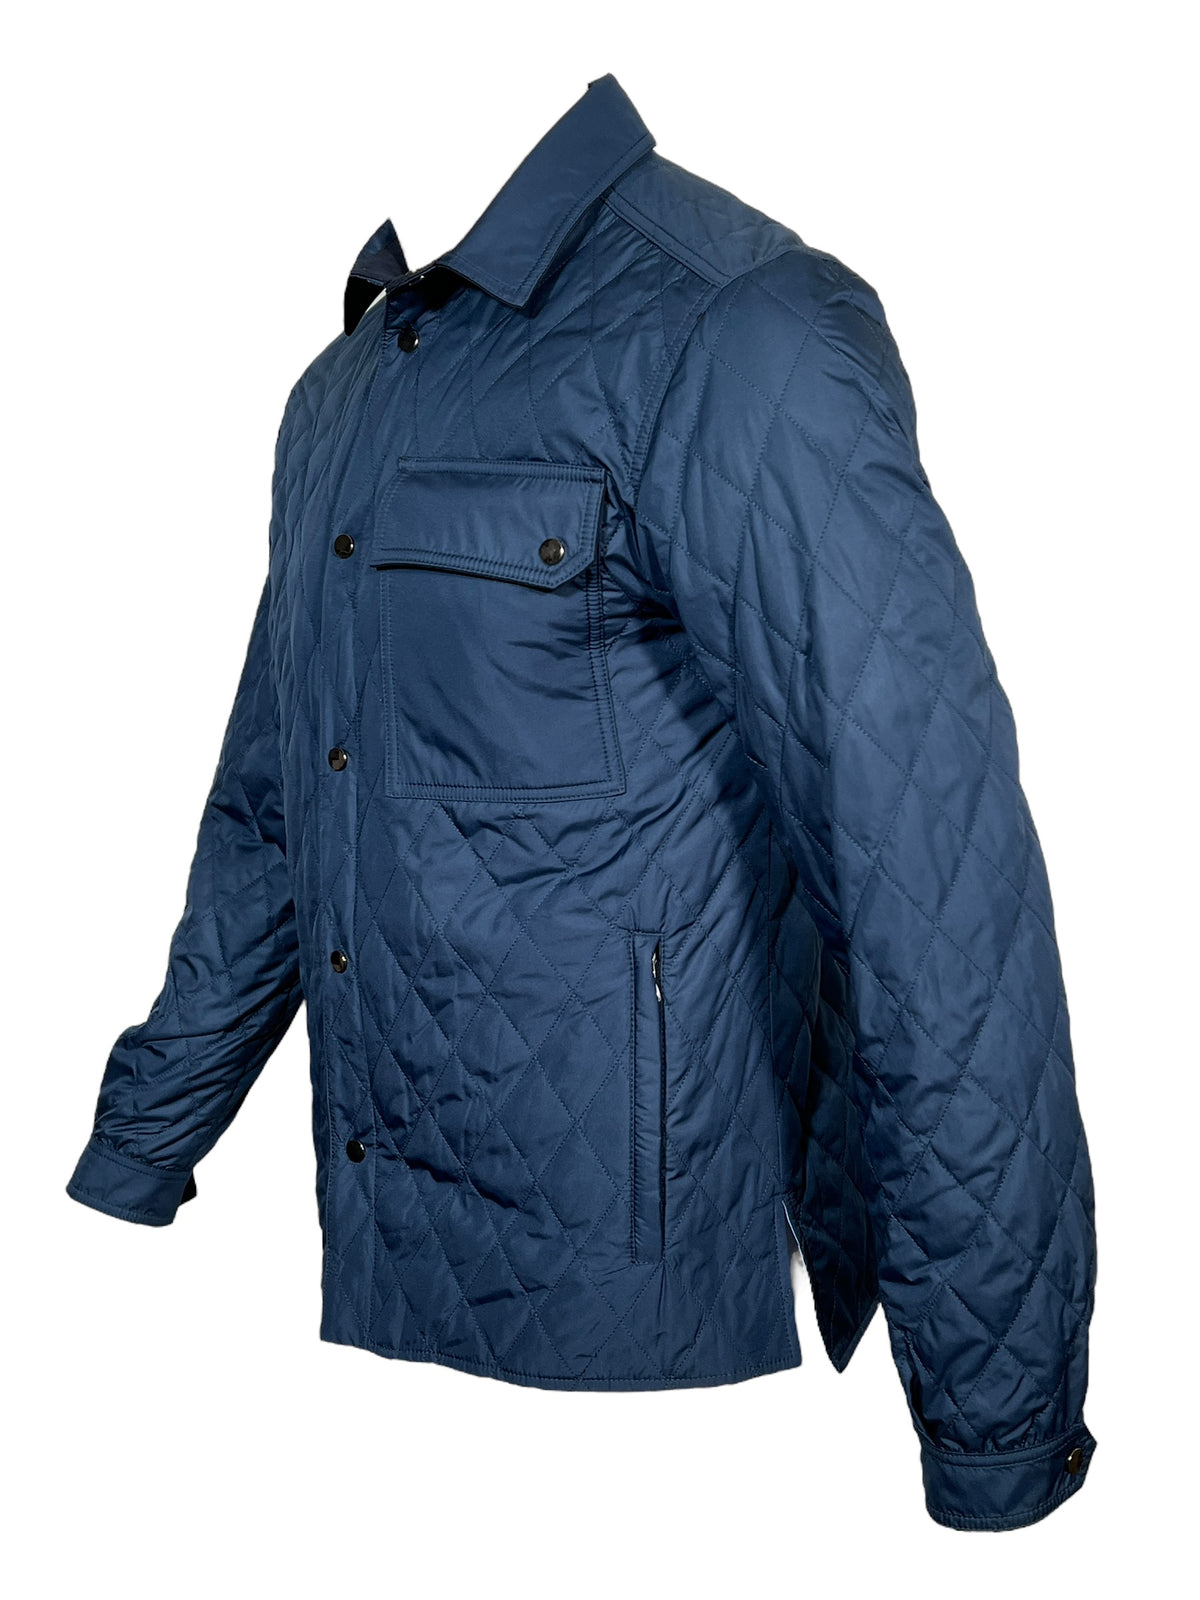 WATERVILLE QUILTED SHIRT JACKET - NAVY